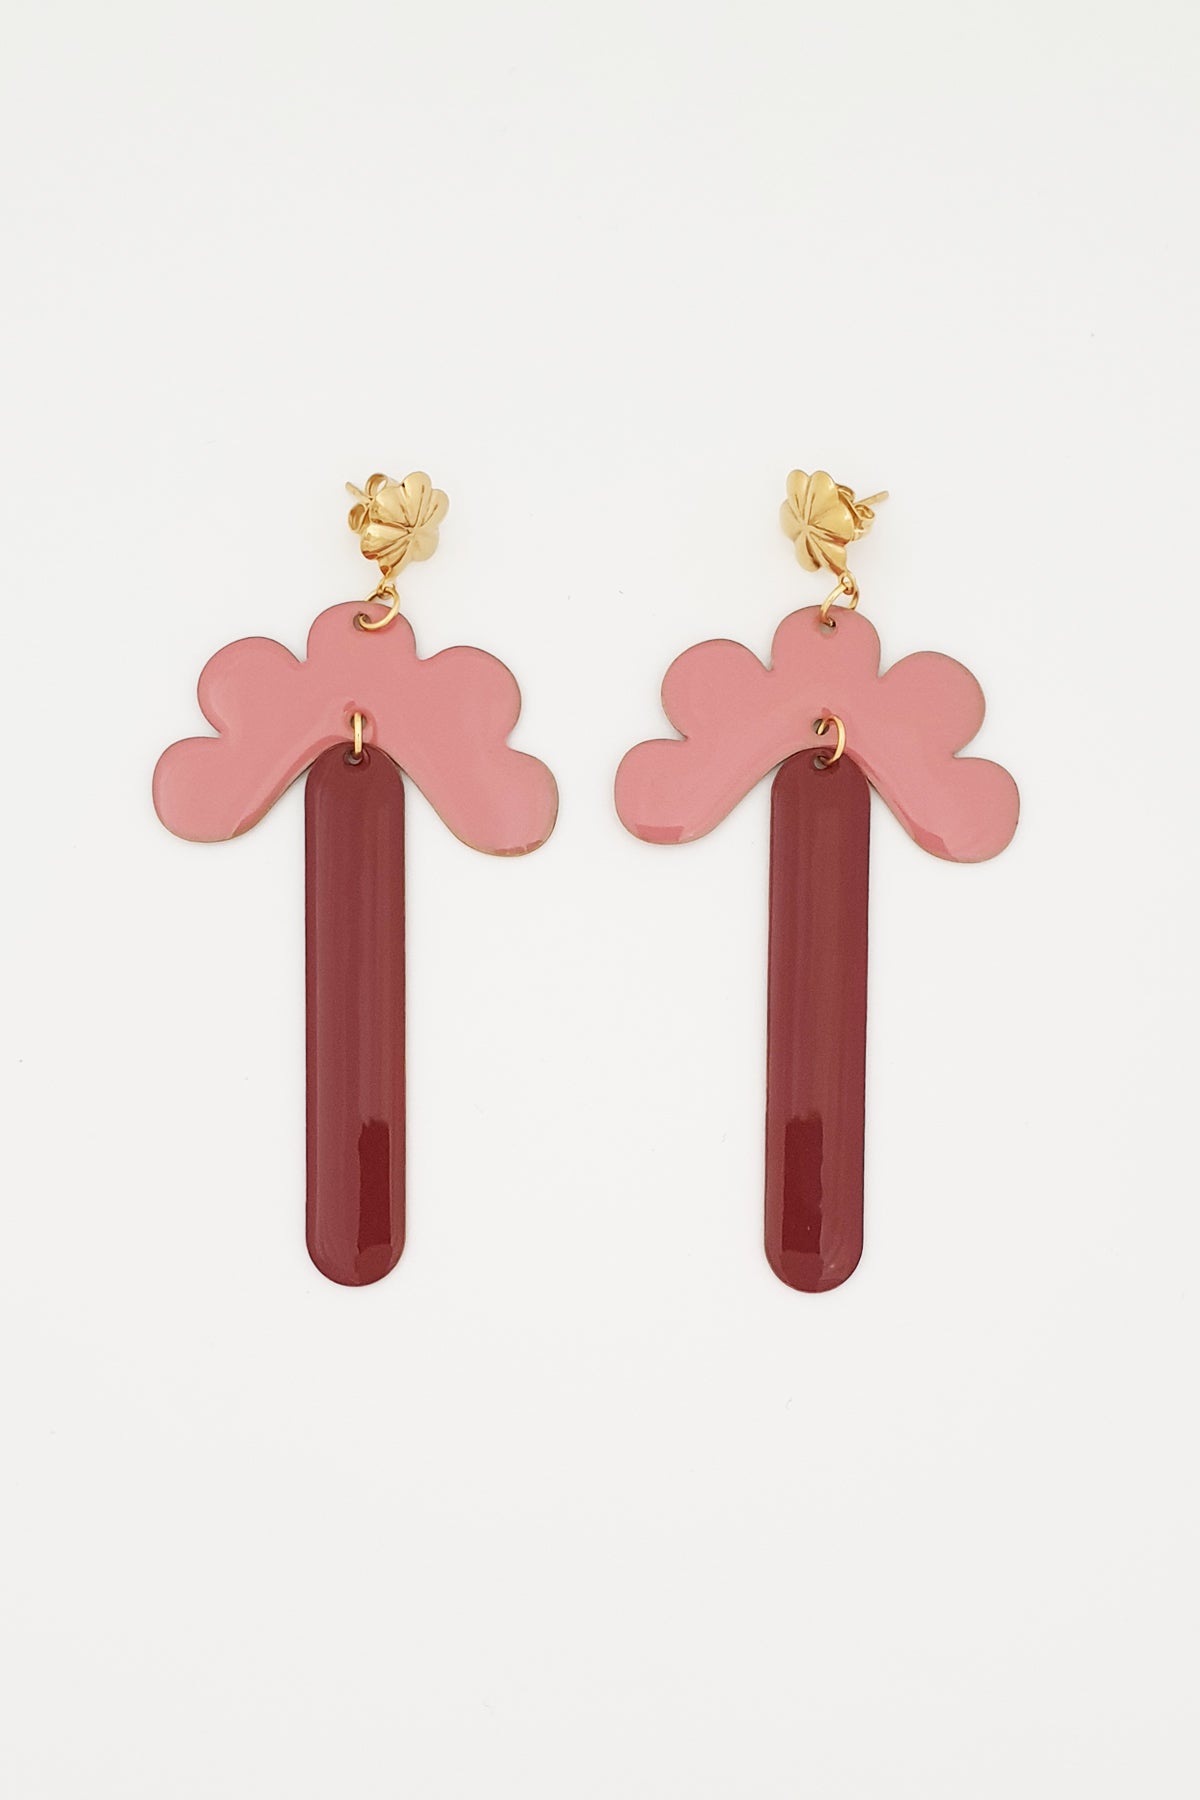 A pair of stud dangle earrings lay against a white background. They feature a gold flower shaped stud top, a pink enamel connector piece with resemblance to a half flower, and a coffee enamel drop.